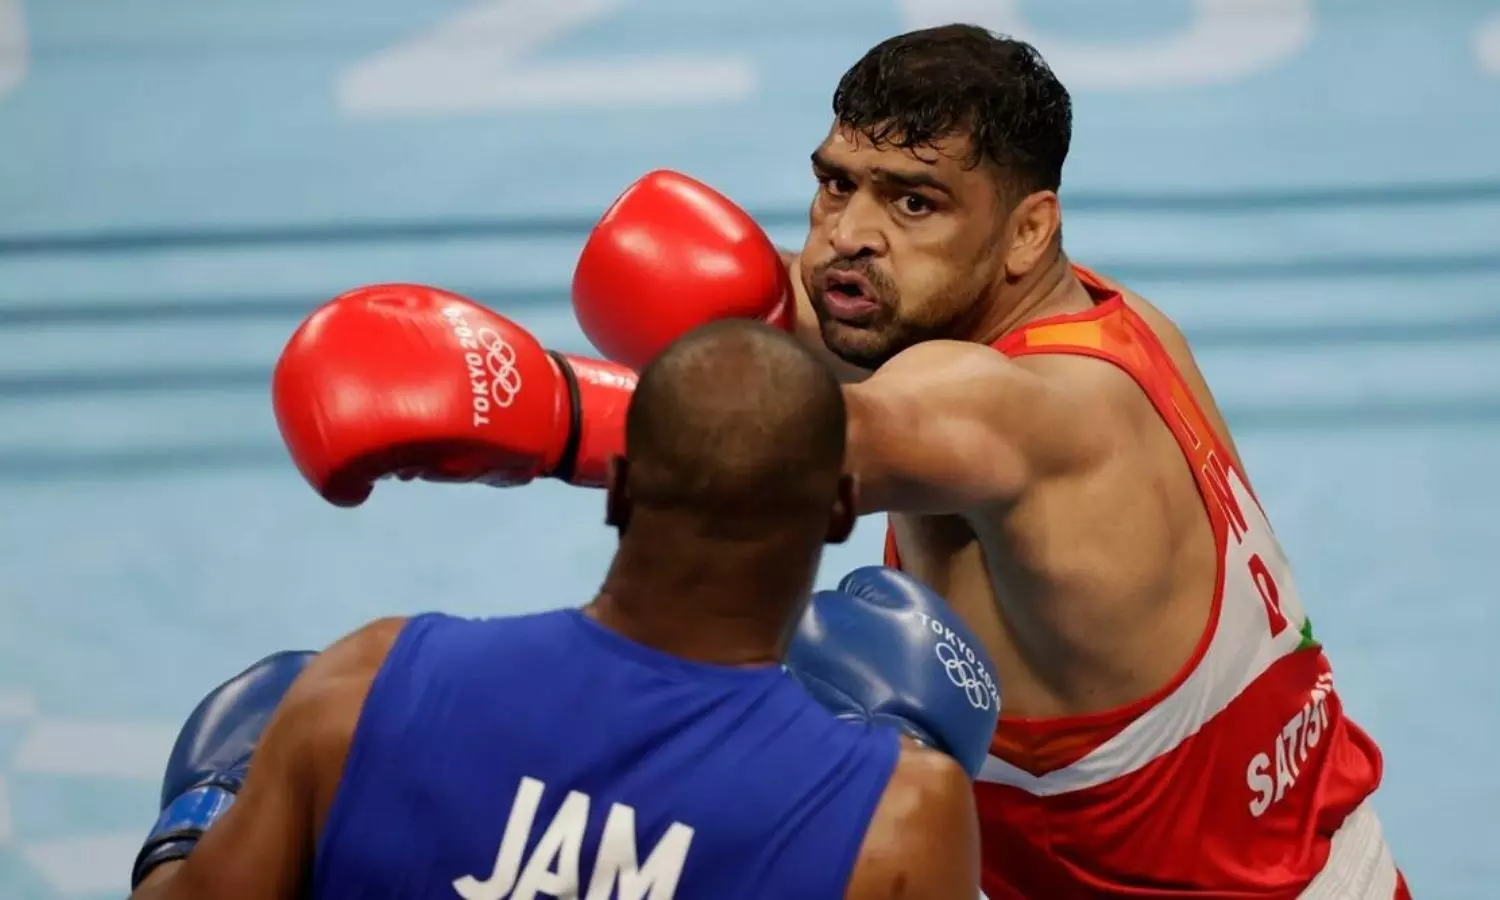 Tokyo Olympics Boxing LIVE Day 9, 1 August - Satish Kumar one win away from medal